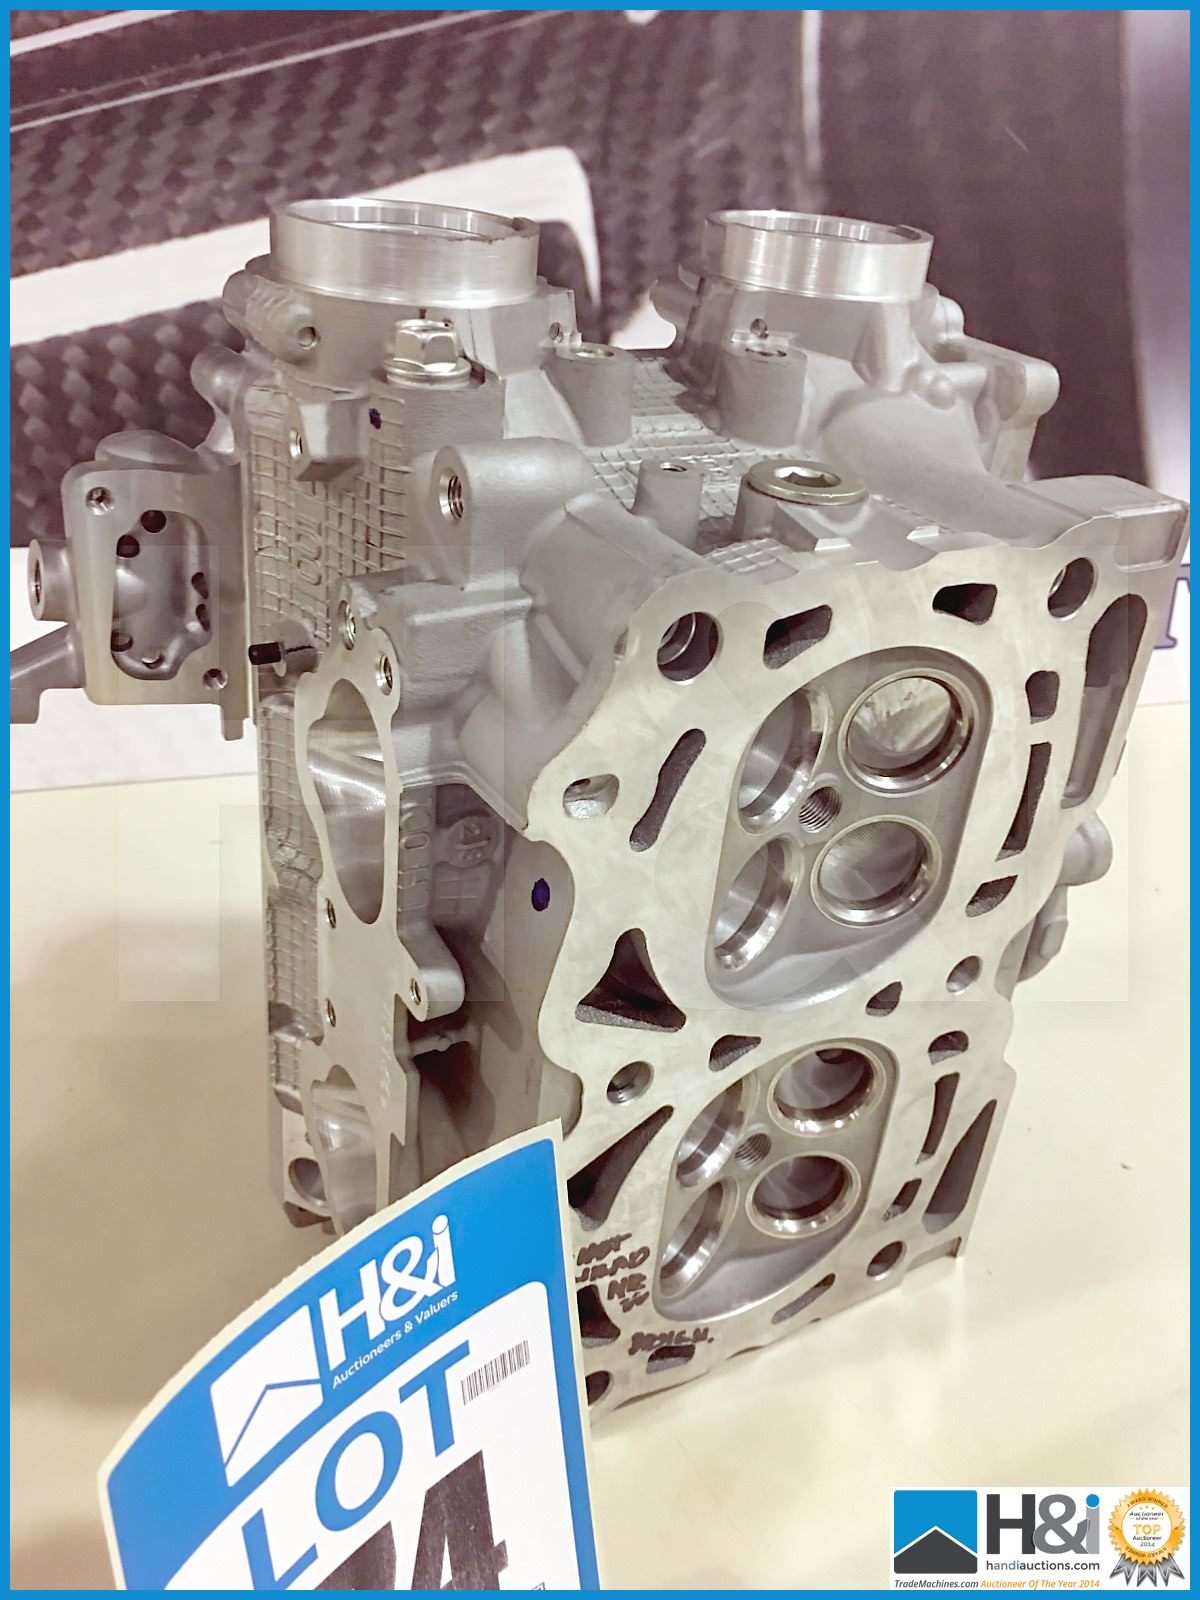 4 off Subaru cylinder head left hand - EJ25 07MY. Appx lot value over GBP 2,100 -- MC:20001530 CILN: - Image 4 of 5